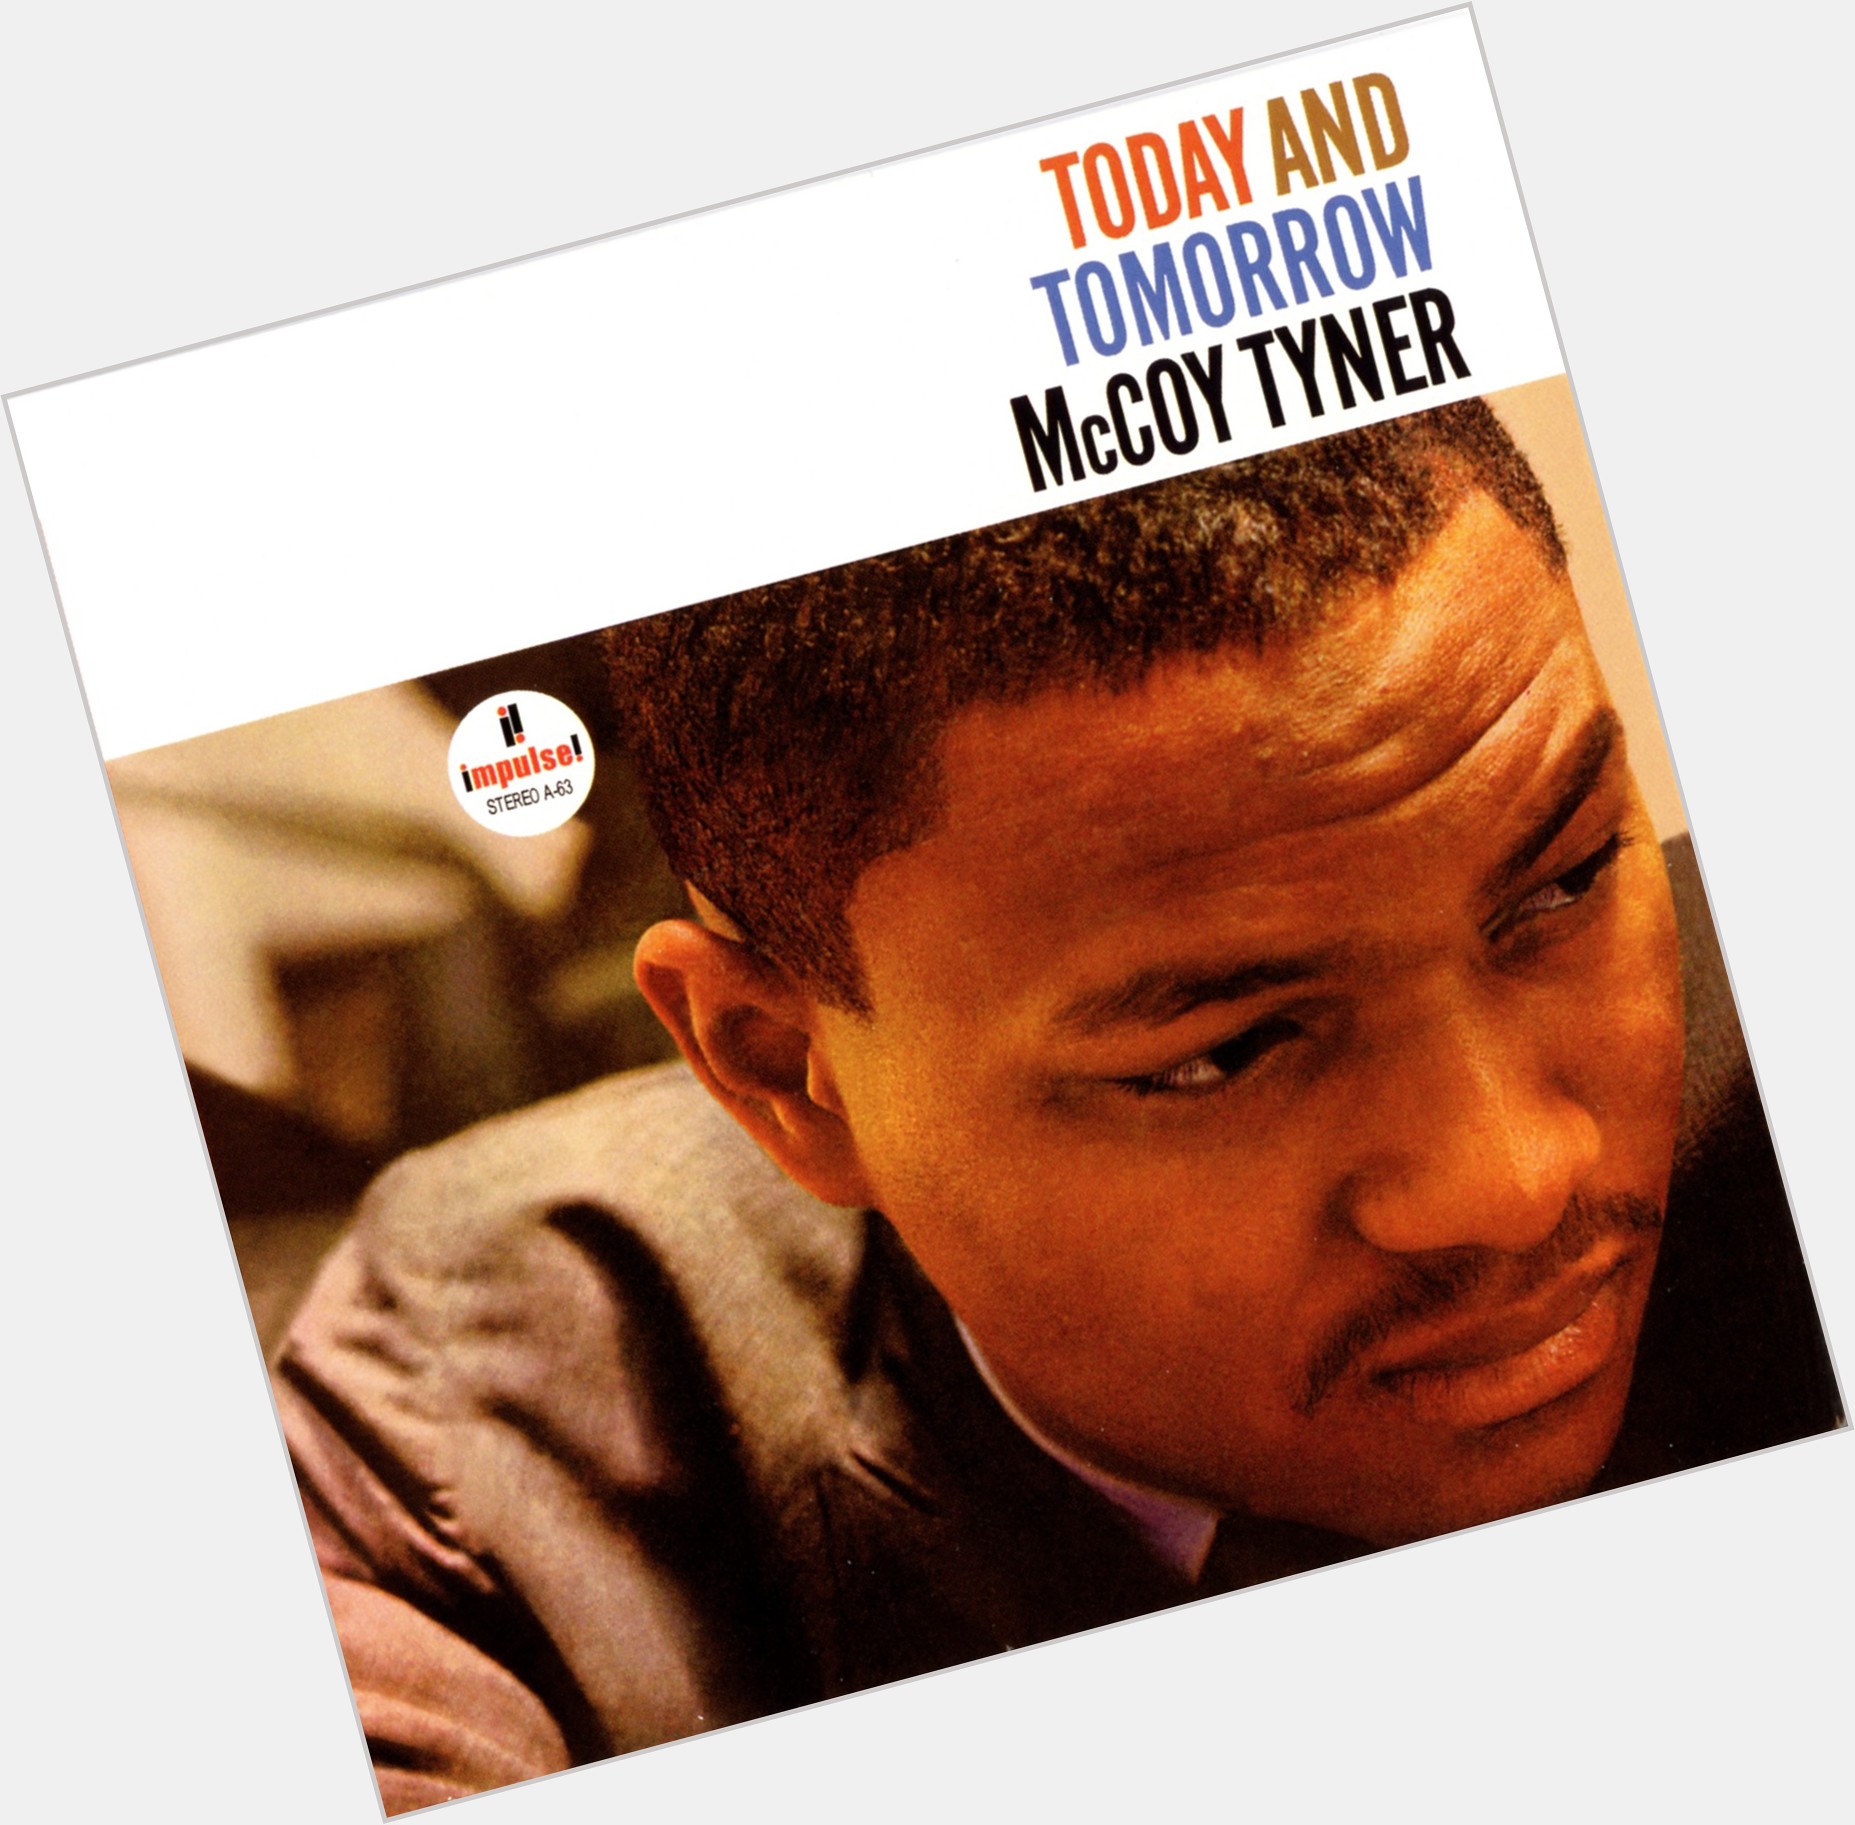 Http://fanpagepress.net/m/M/McCoy Tyner Exclusive Hot Pic 7